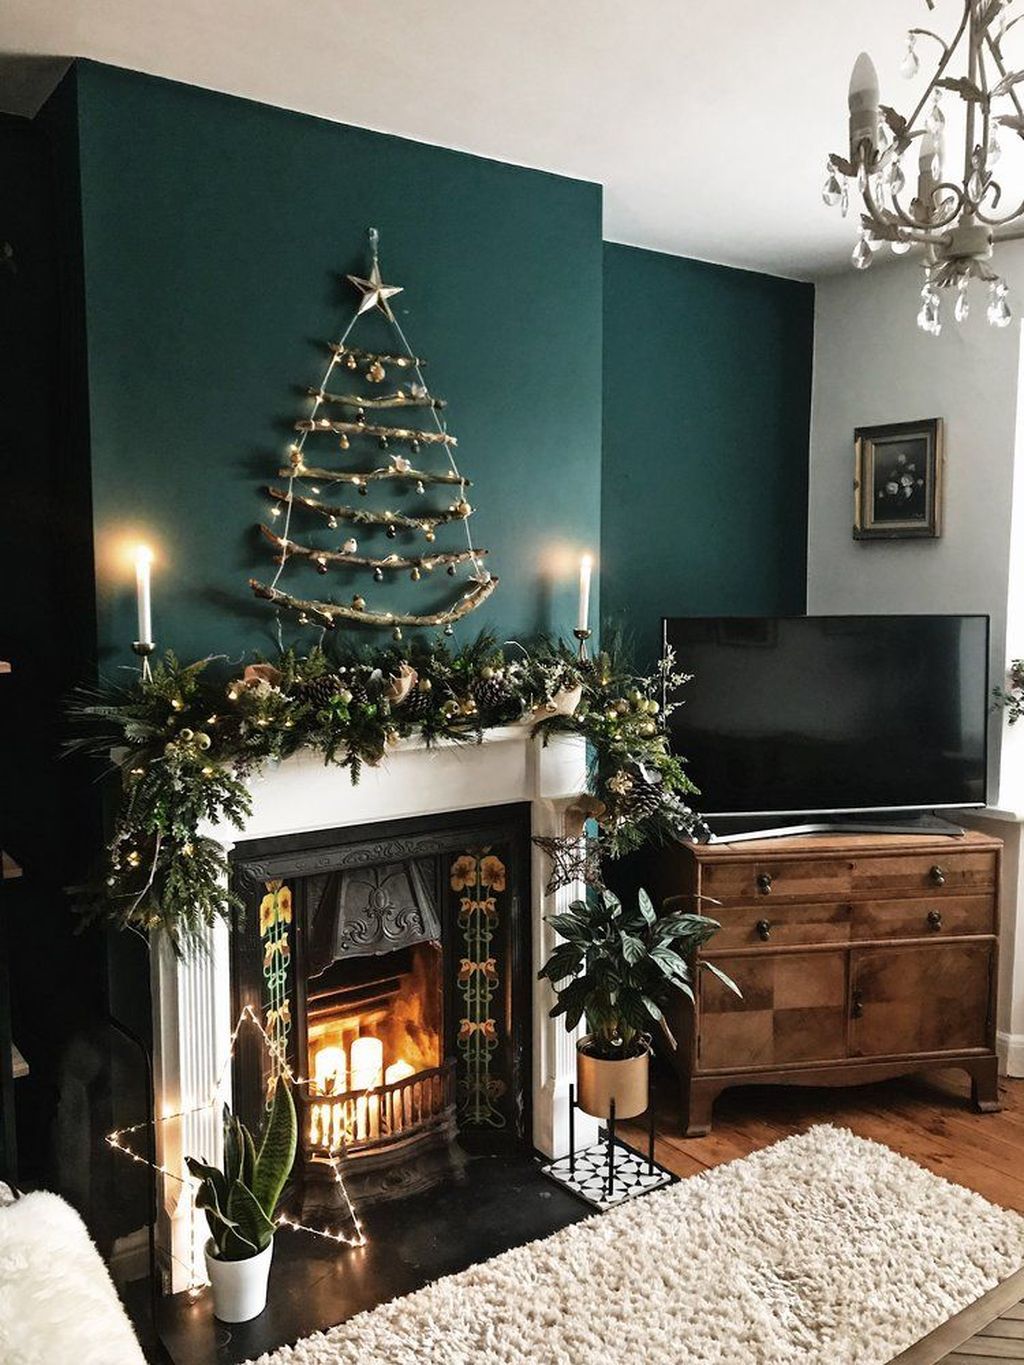 30+ Cozy Christmas Living Room Decor Ideas That You Need To See